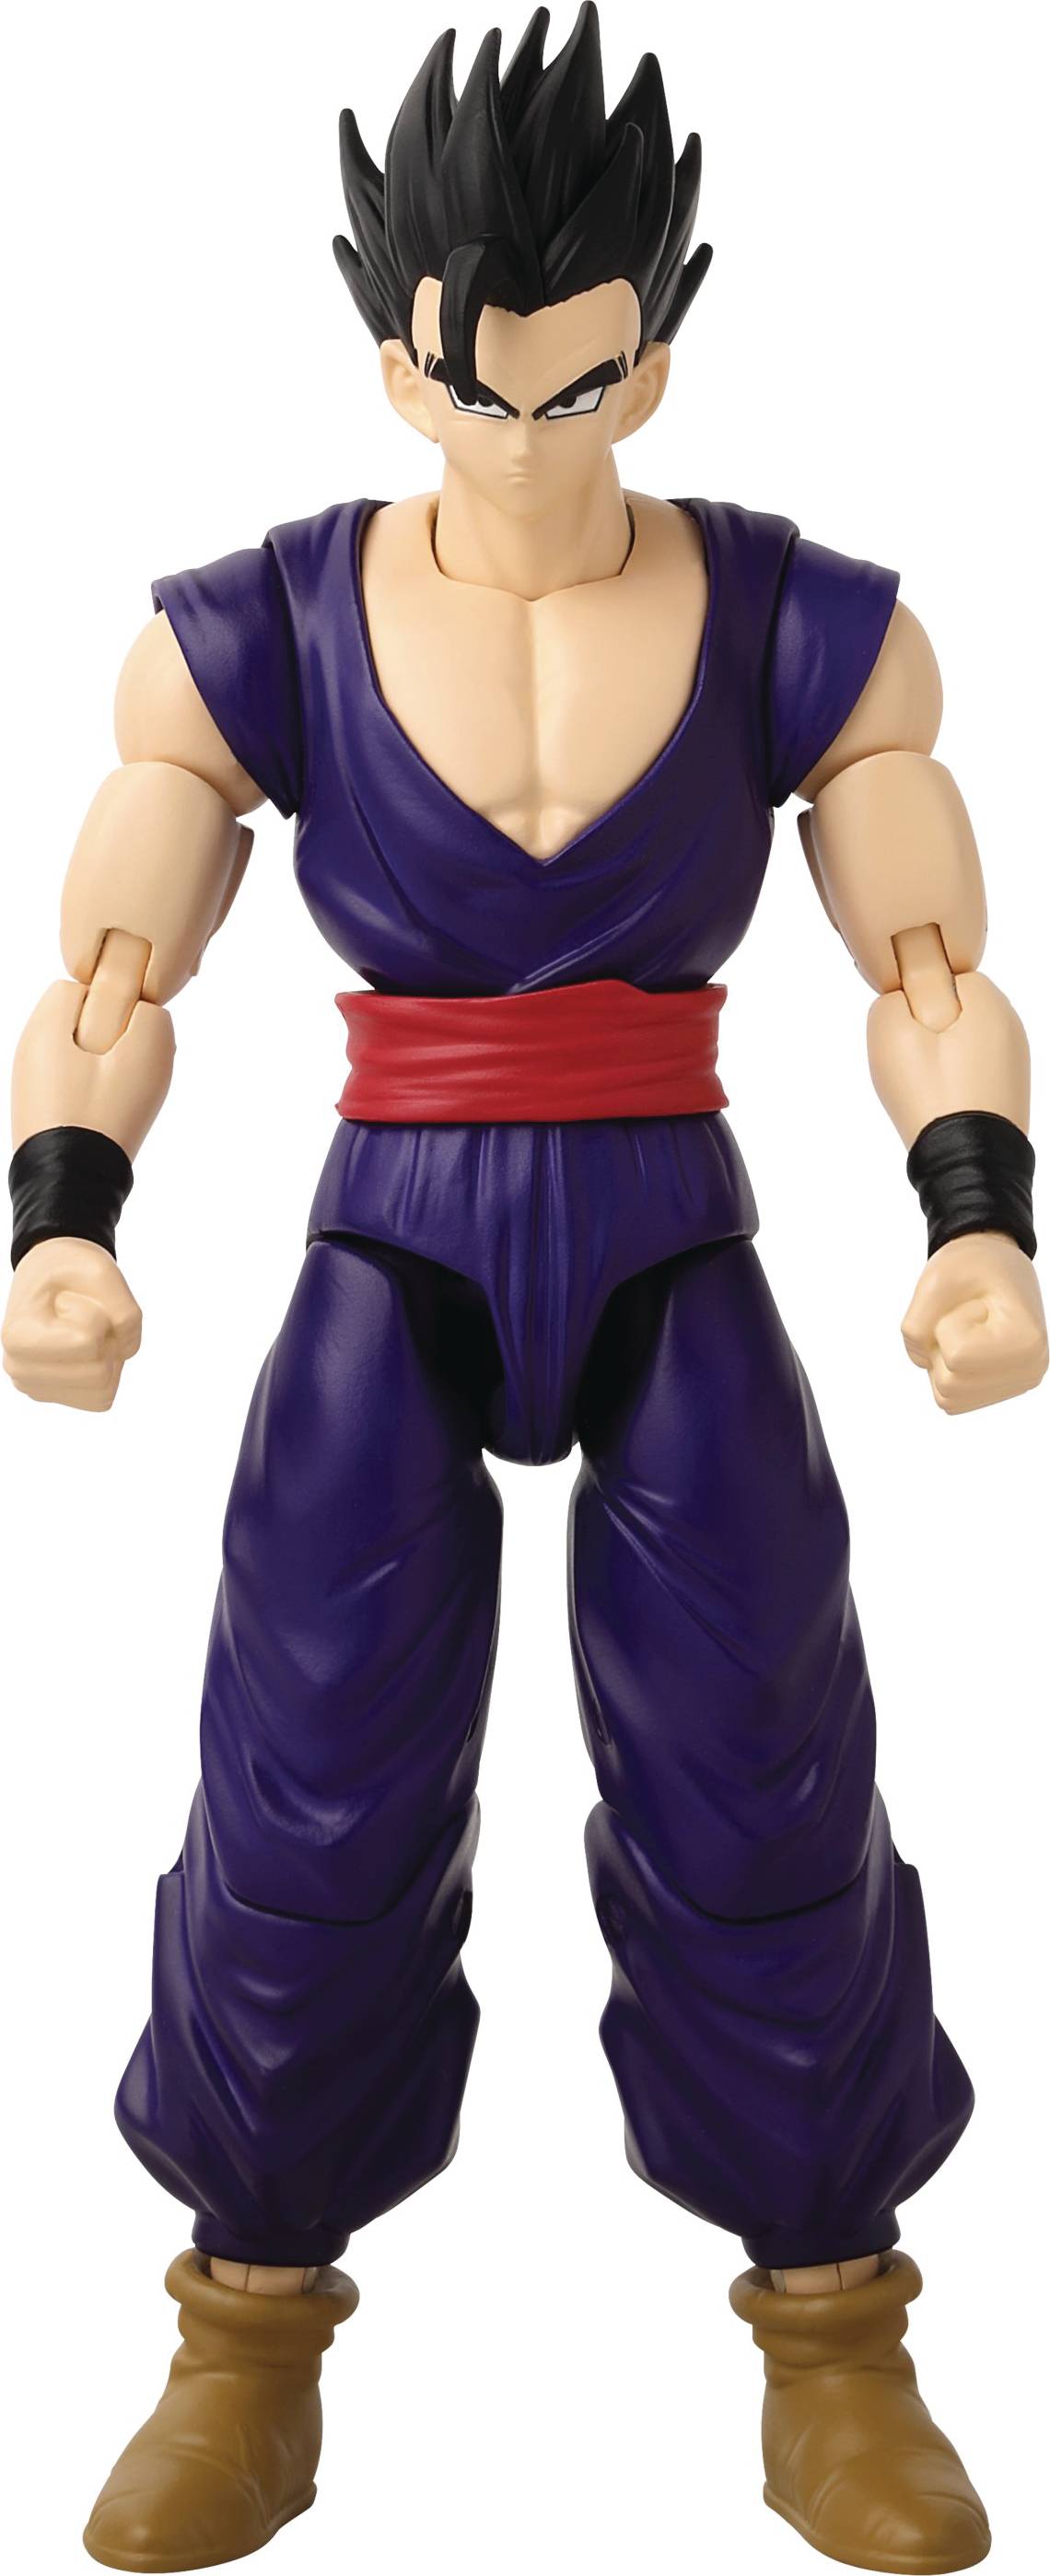 Pan Figures and Dbz Pan Action Figures and Statues for Sale